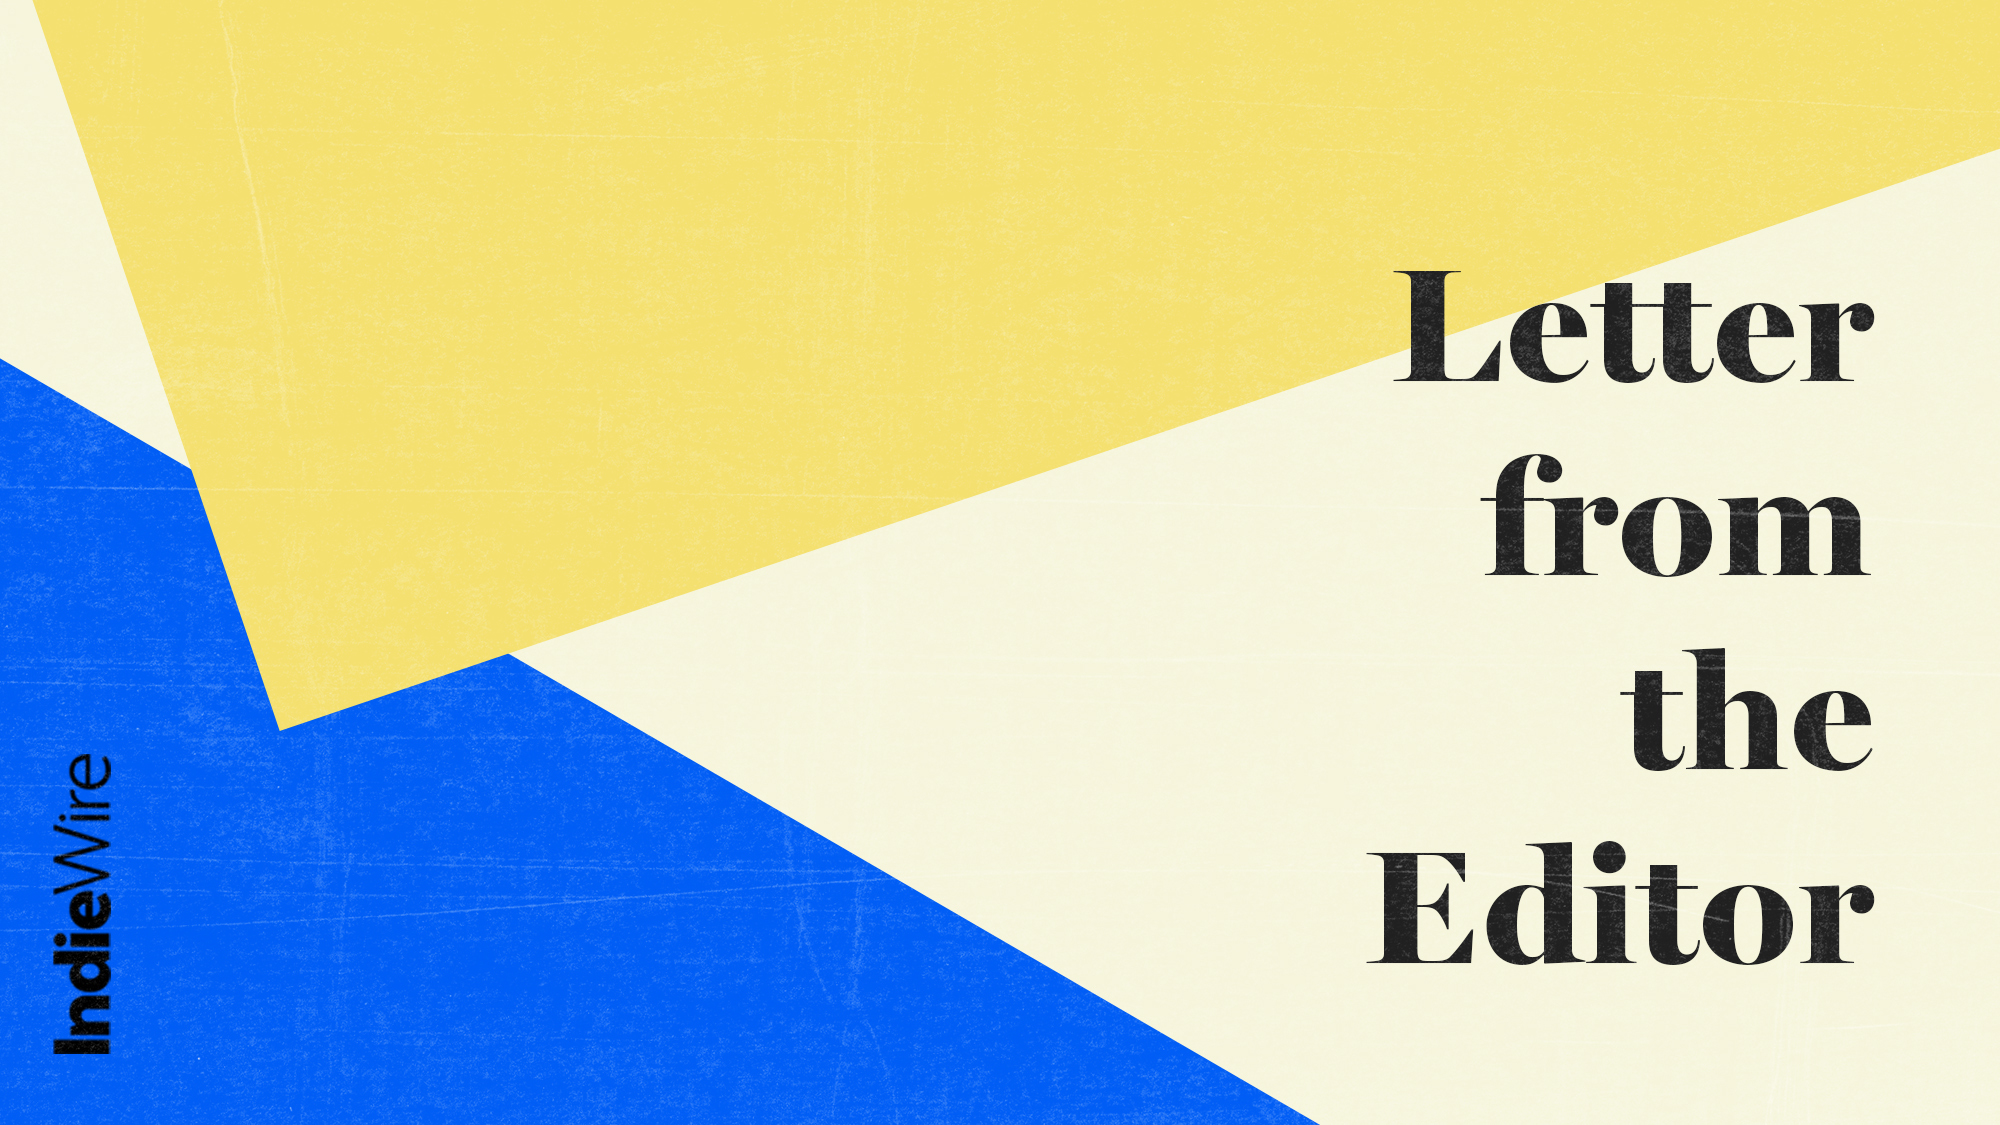 Paper-cutout-like design of bold, overlapping colors reminiscent of Henri Matisse, with the logo for IndieWire and the title "Letter from the Editor"